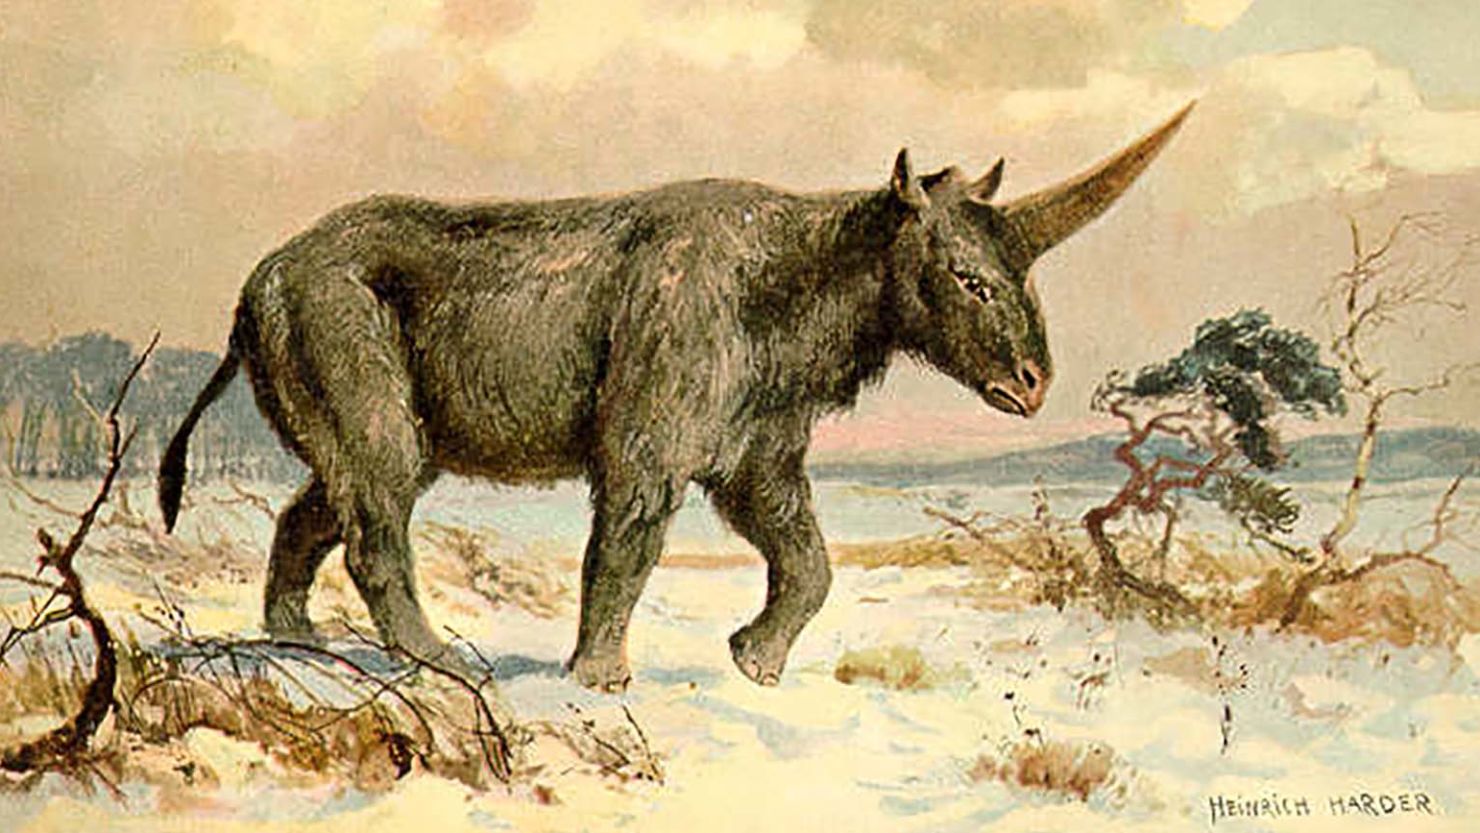 An illustration of the mysterious 3.8-ton Elasmotherium sibiricum by Heinrich Harder, circa 1920.